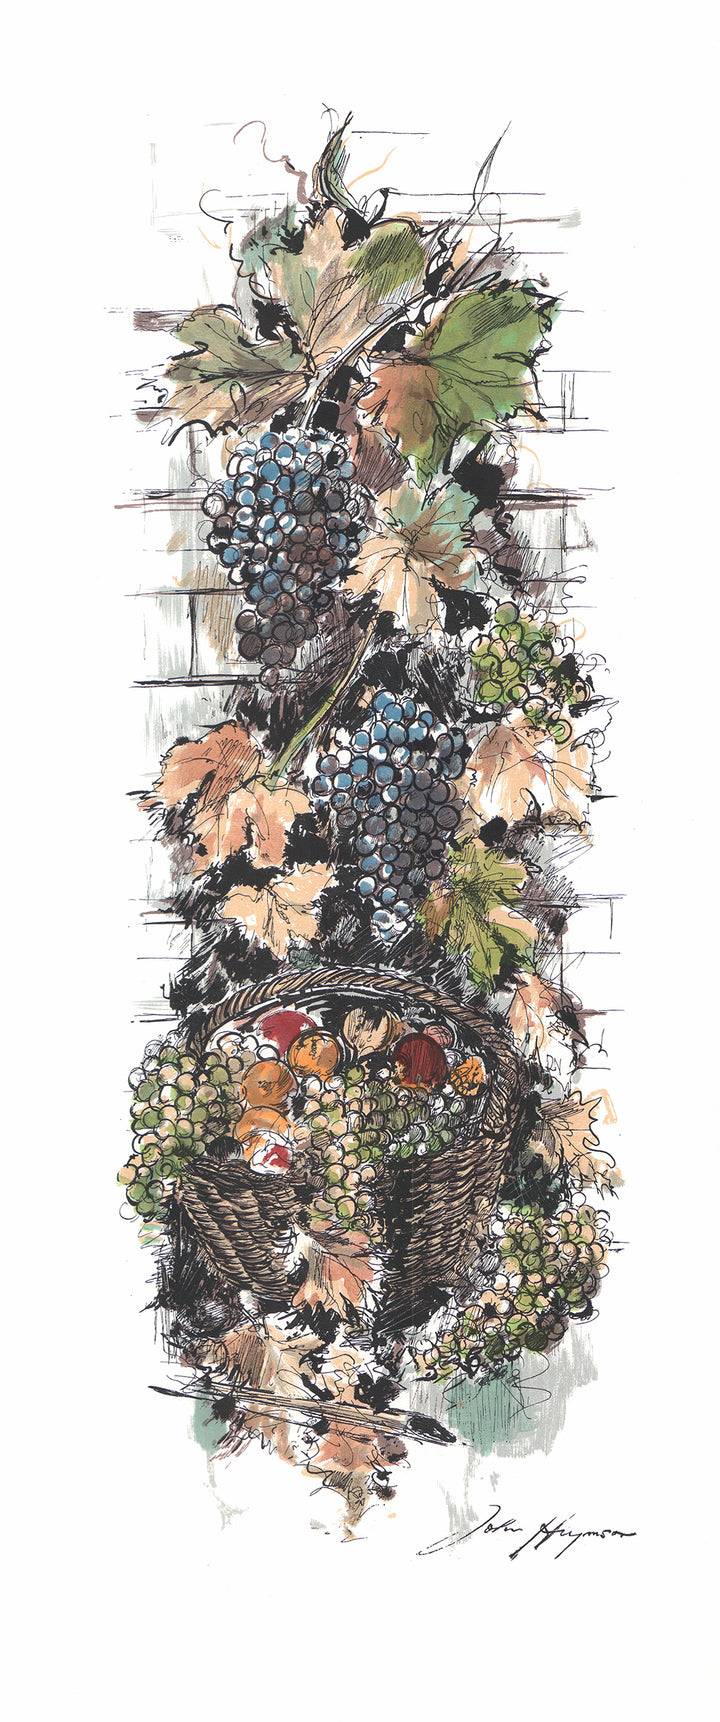 Grapes by John Haymson - 16 X 35 Inches (Hand Colored Watercolor)